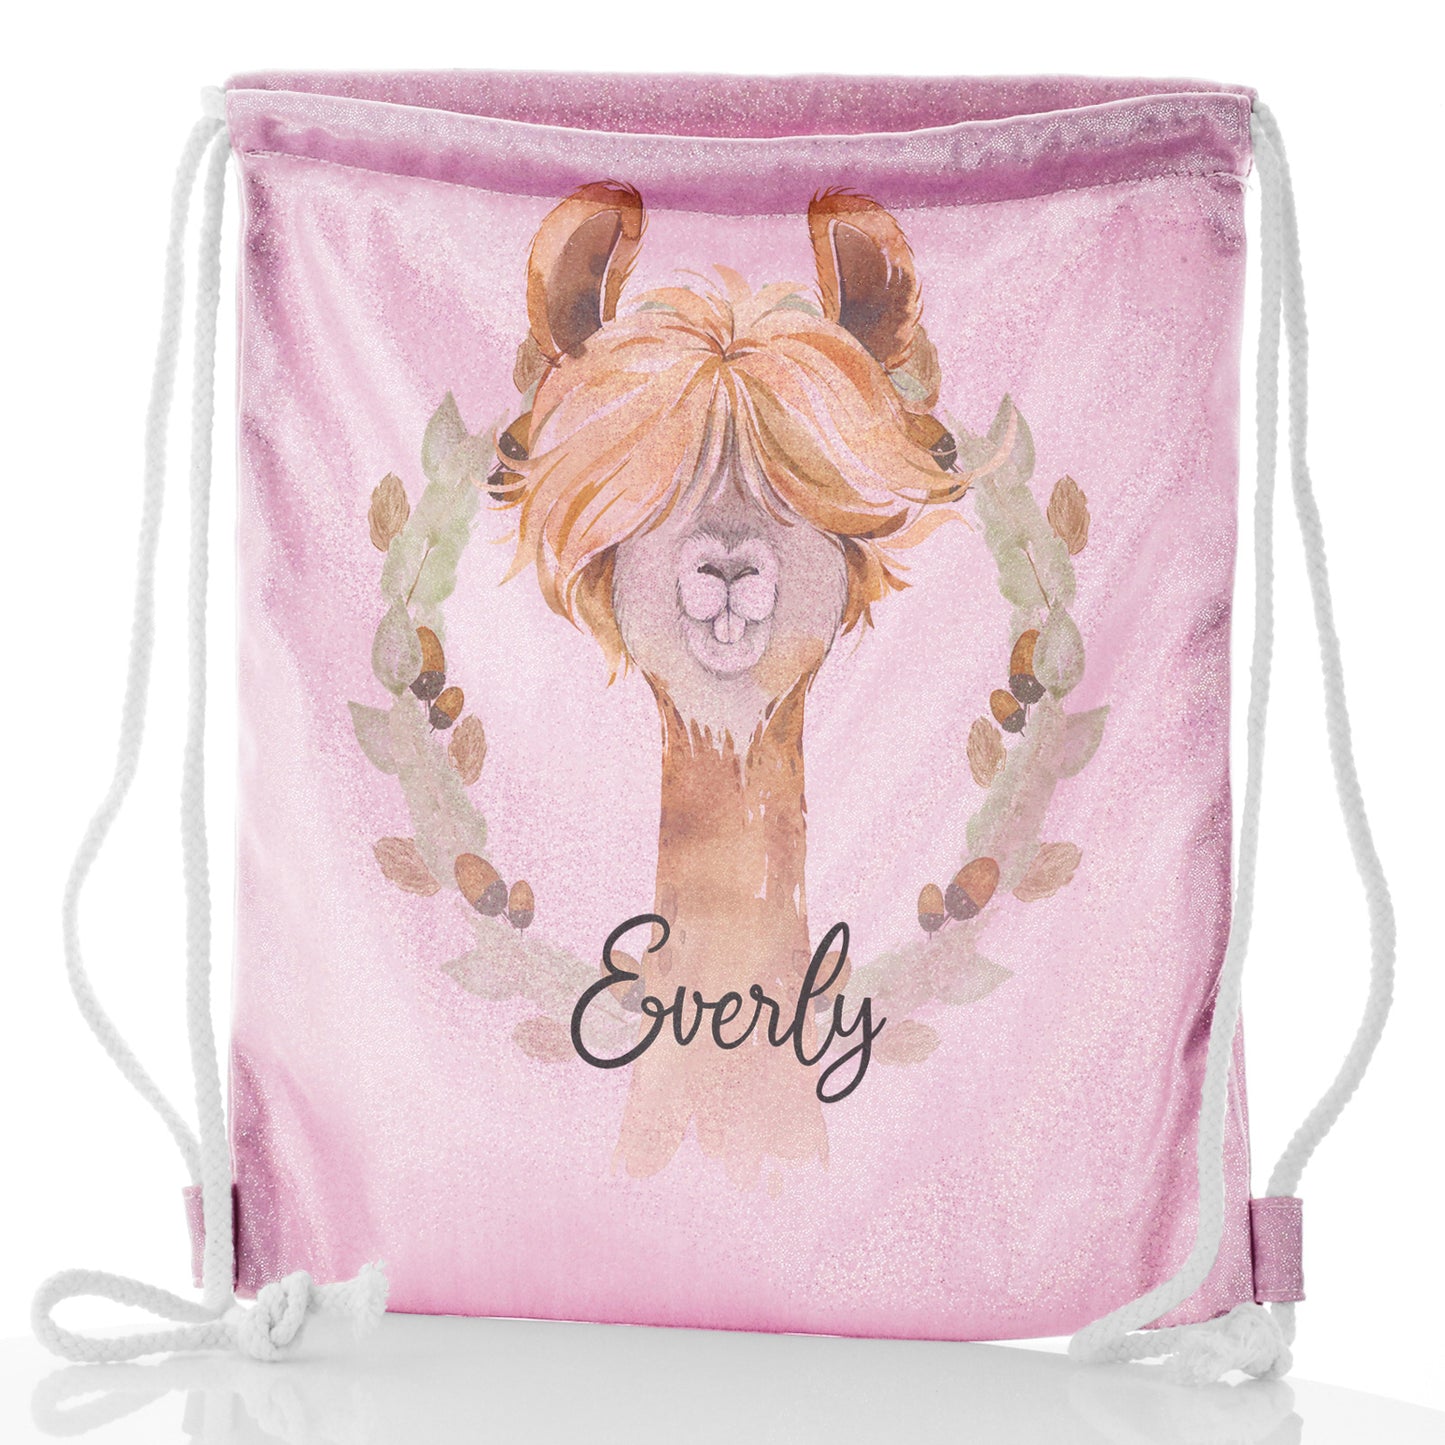 Personalised Glitter Drawstring Backpack with Brown Alpaca Acorn Wreath and Cute Text